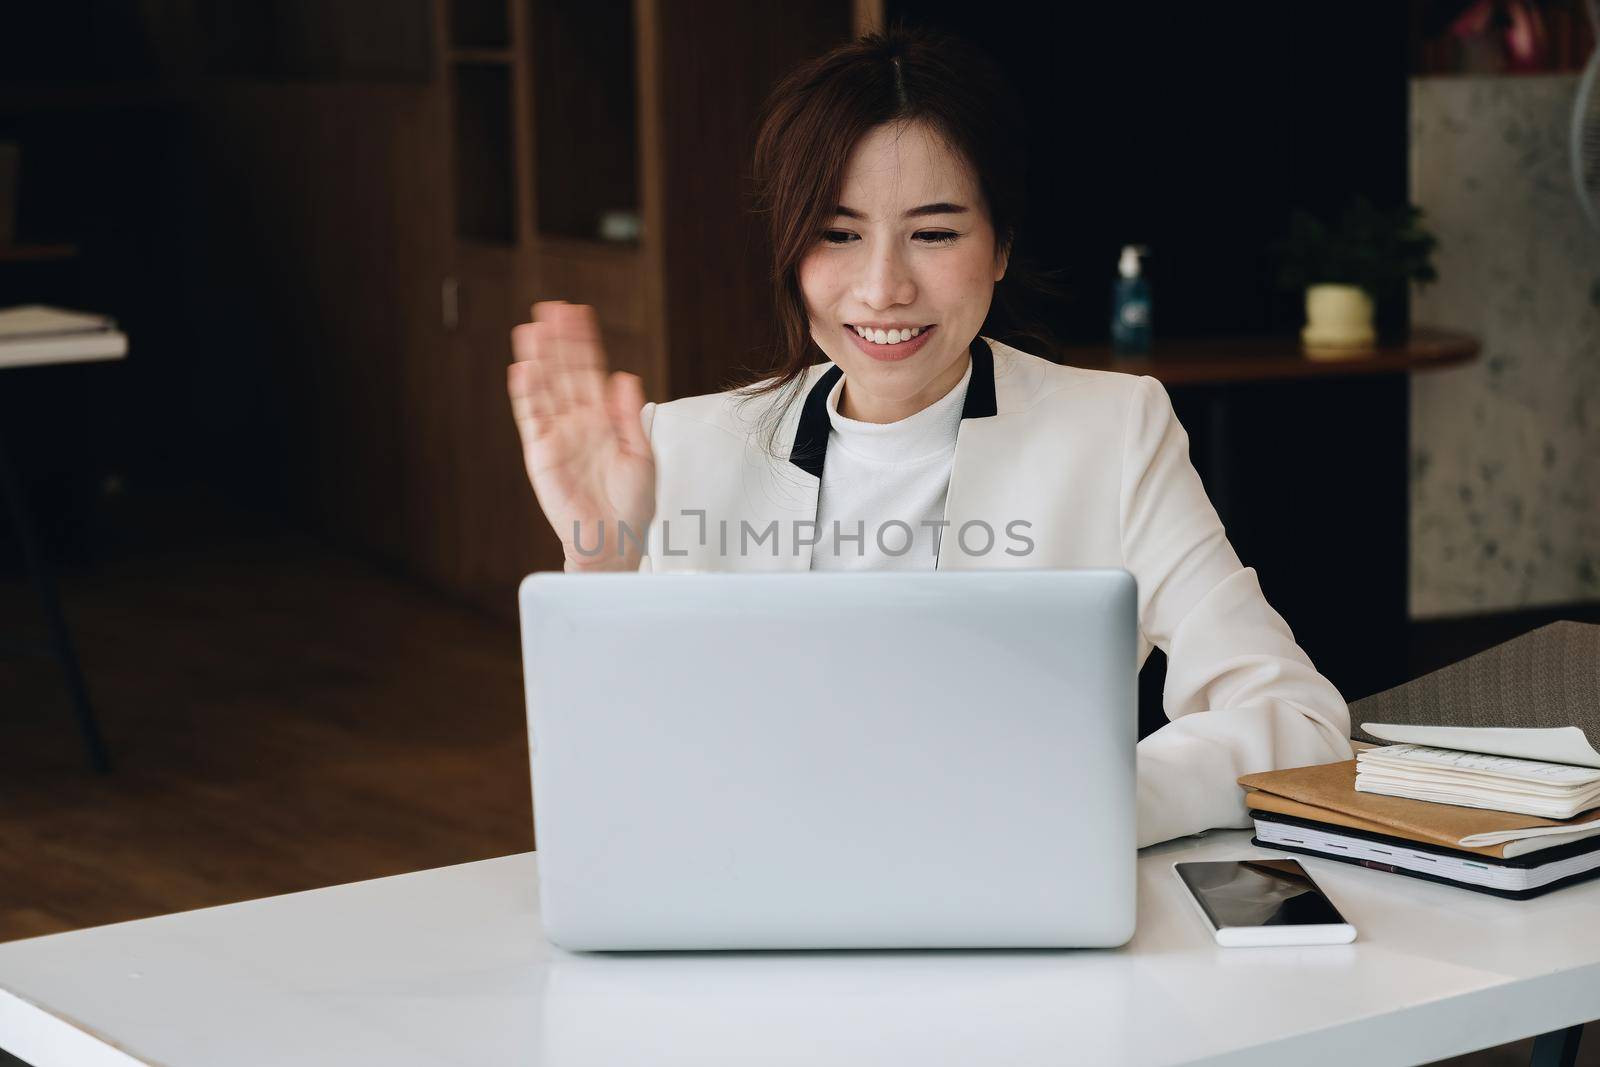 Video call concept, young business woman using a laptop for video connection with family, remote meeting, say hi, looking at the webcam